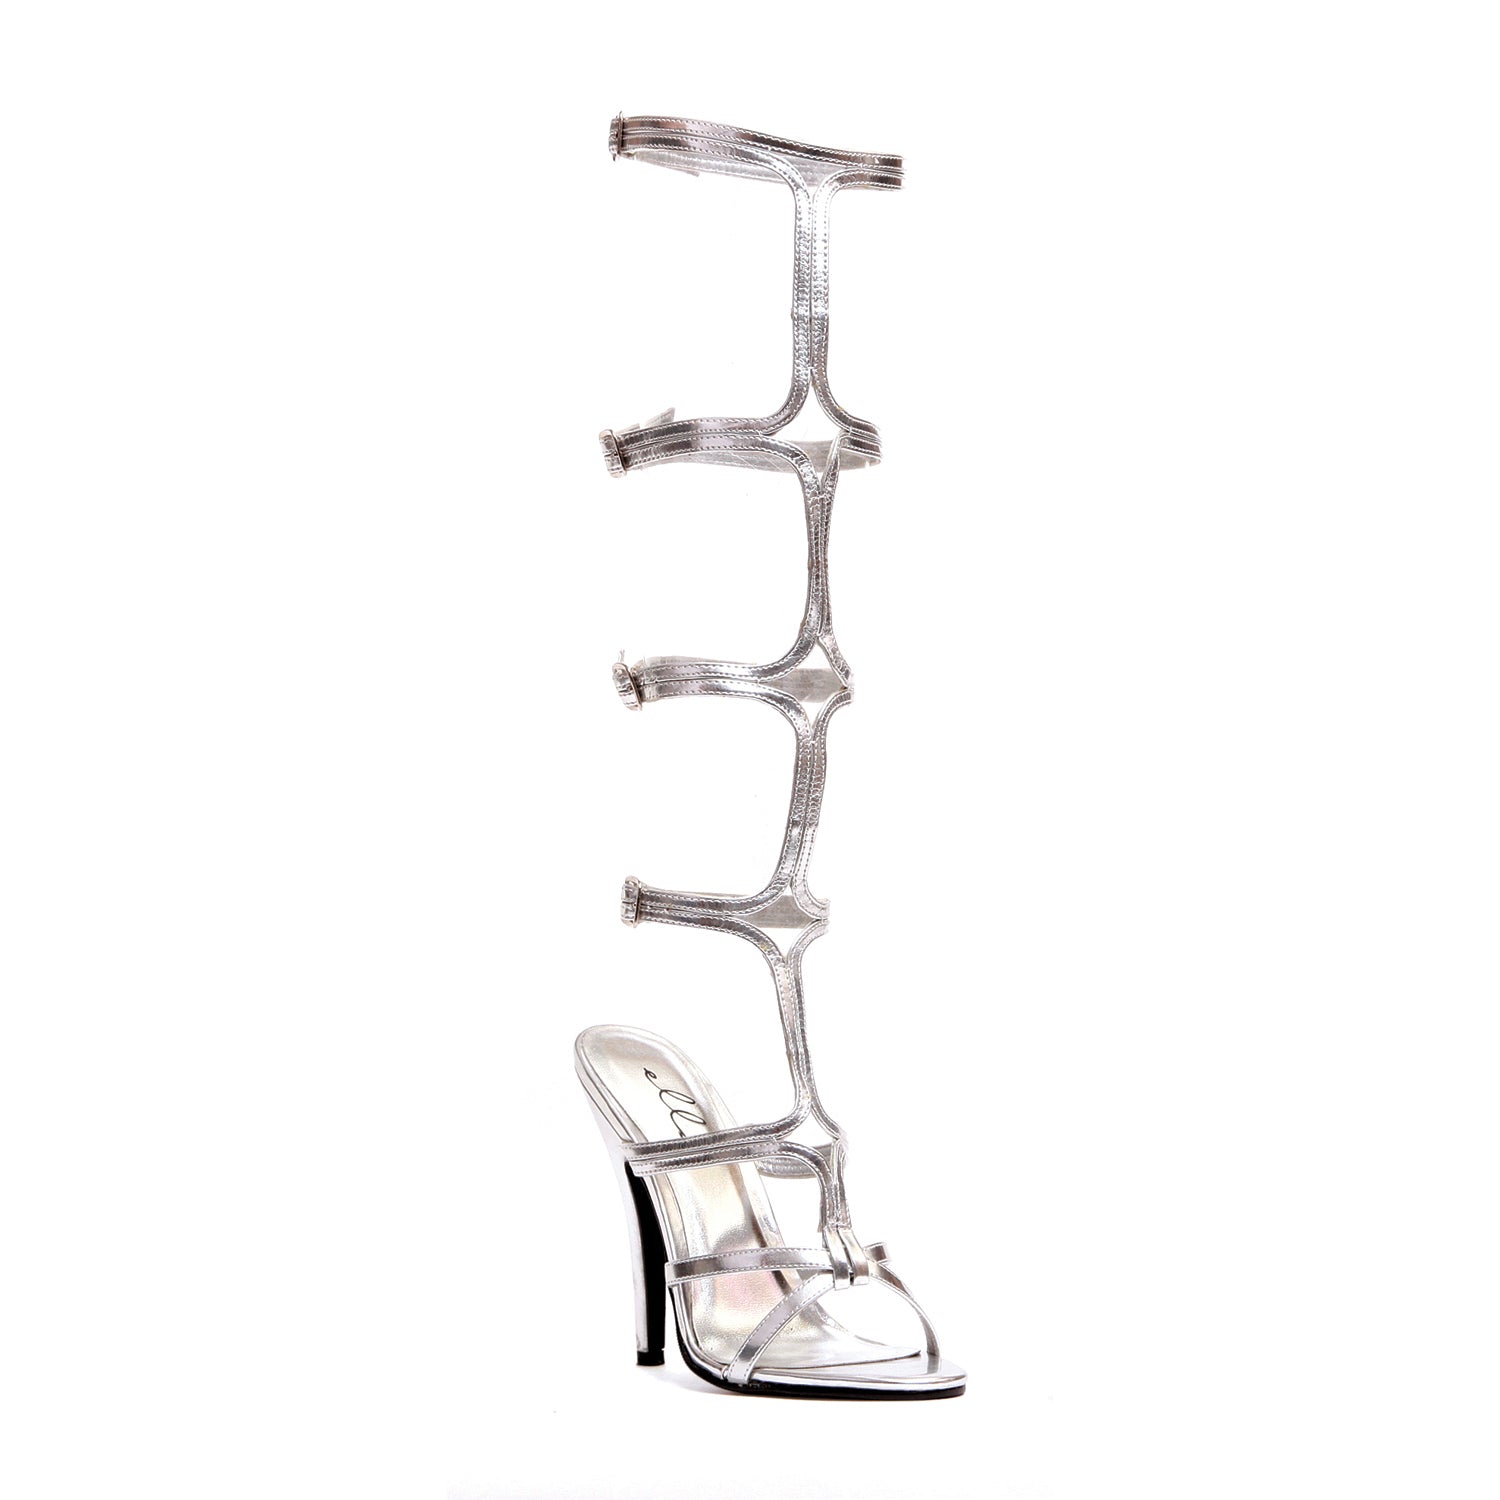 510-SEXY Ellie Shoes 5" Heel Knee High Strap Up Sandal. EXTENDED S 5 INCH HEEL KNEE HIGH